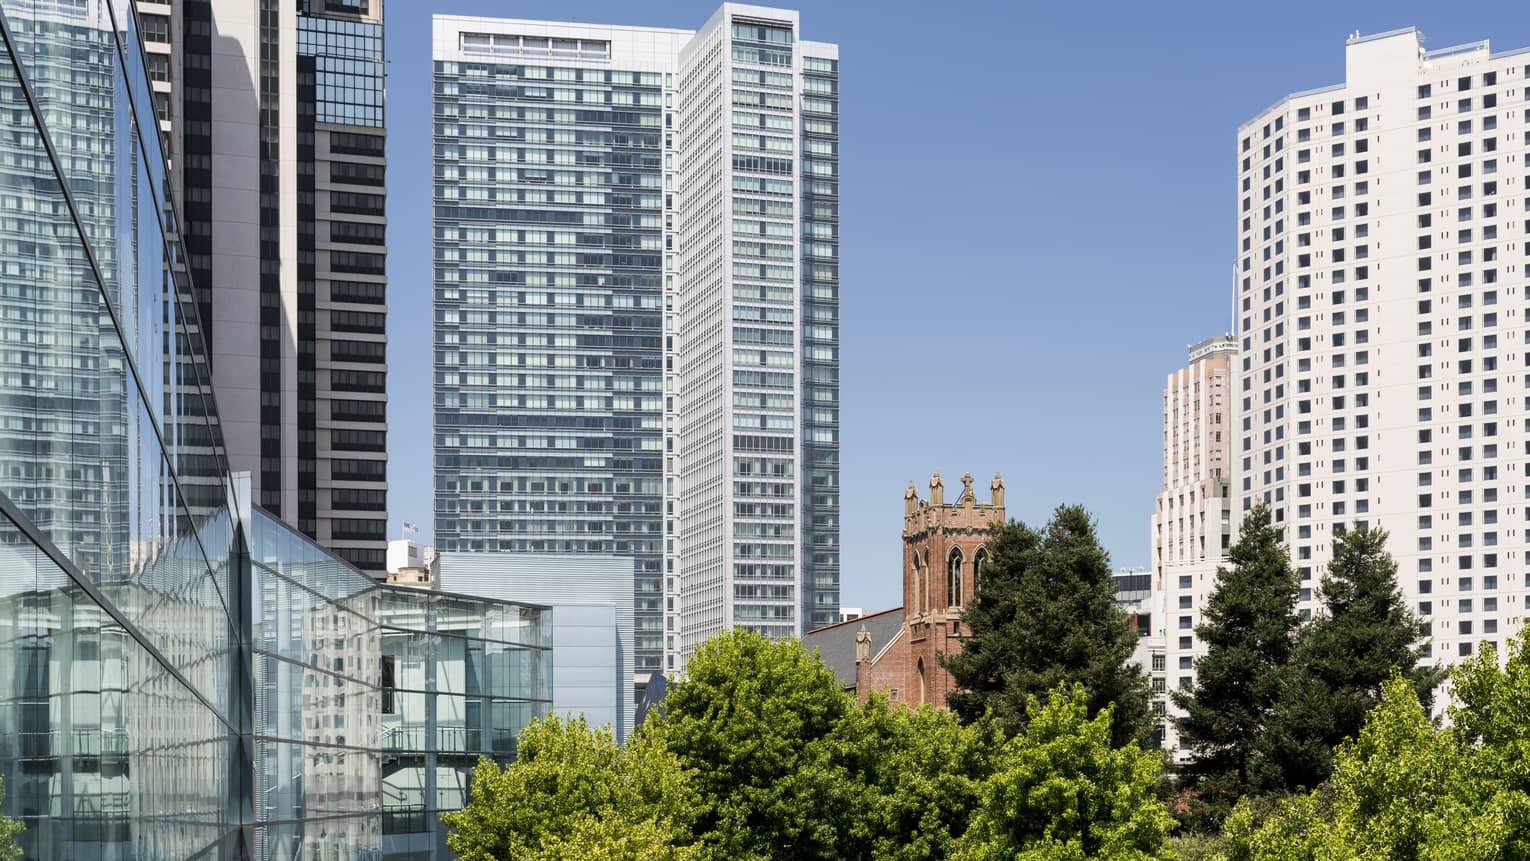 Outdoor view of tall buildings in San Francisco's Yerba Buena neighbourhood on sunny day